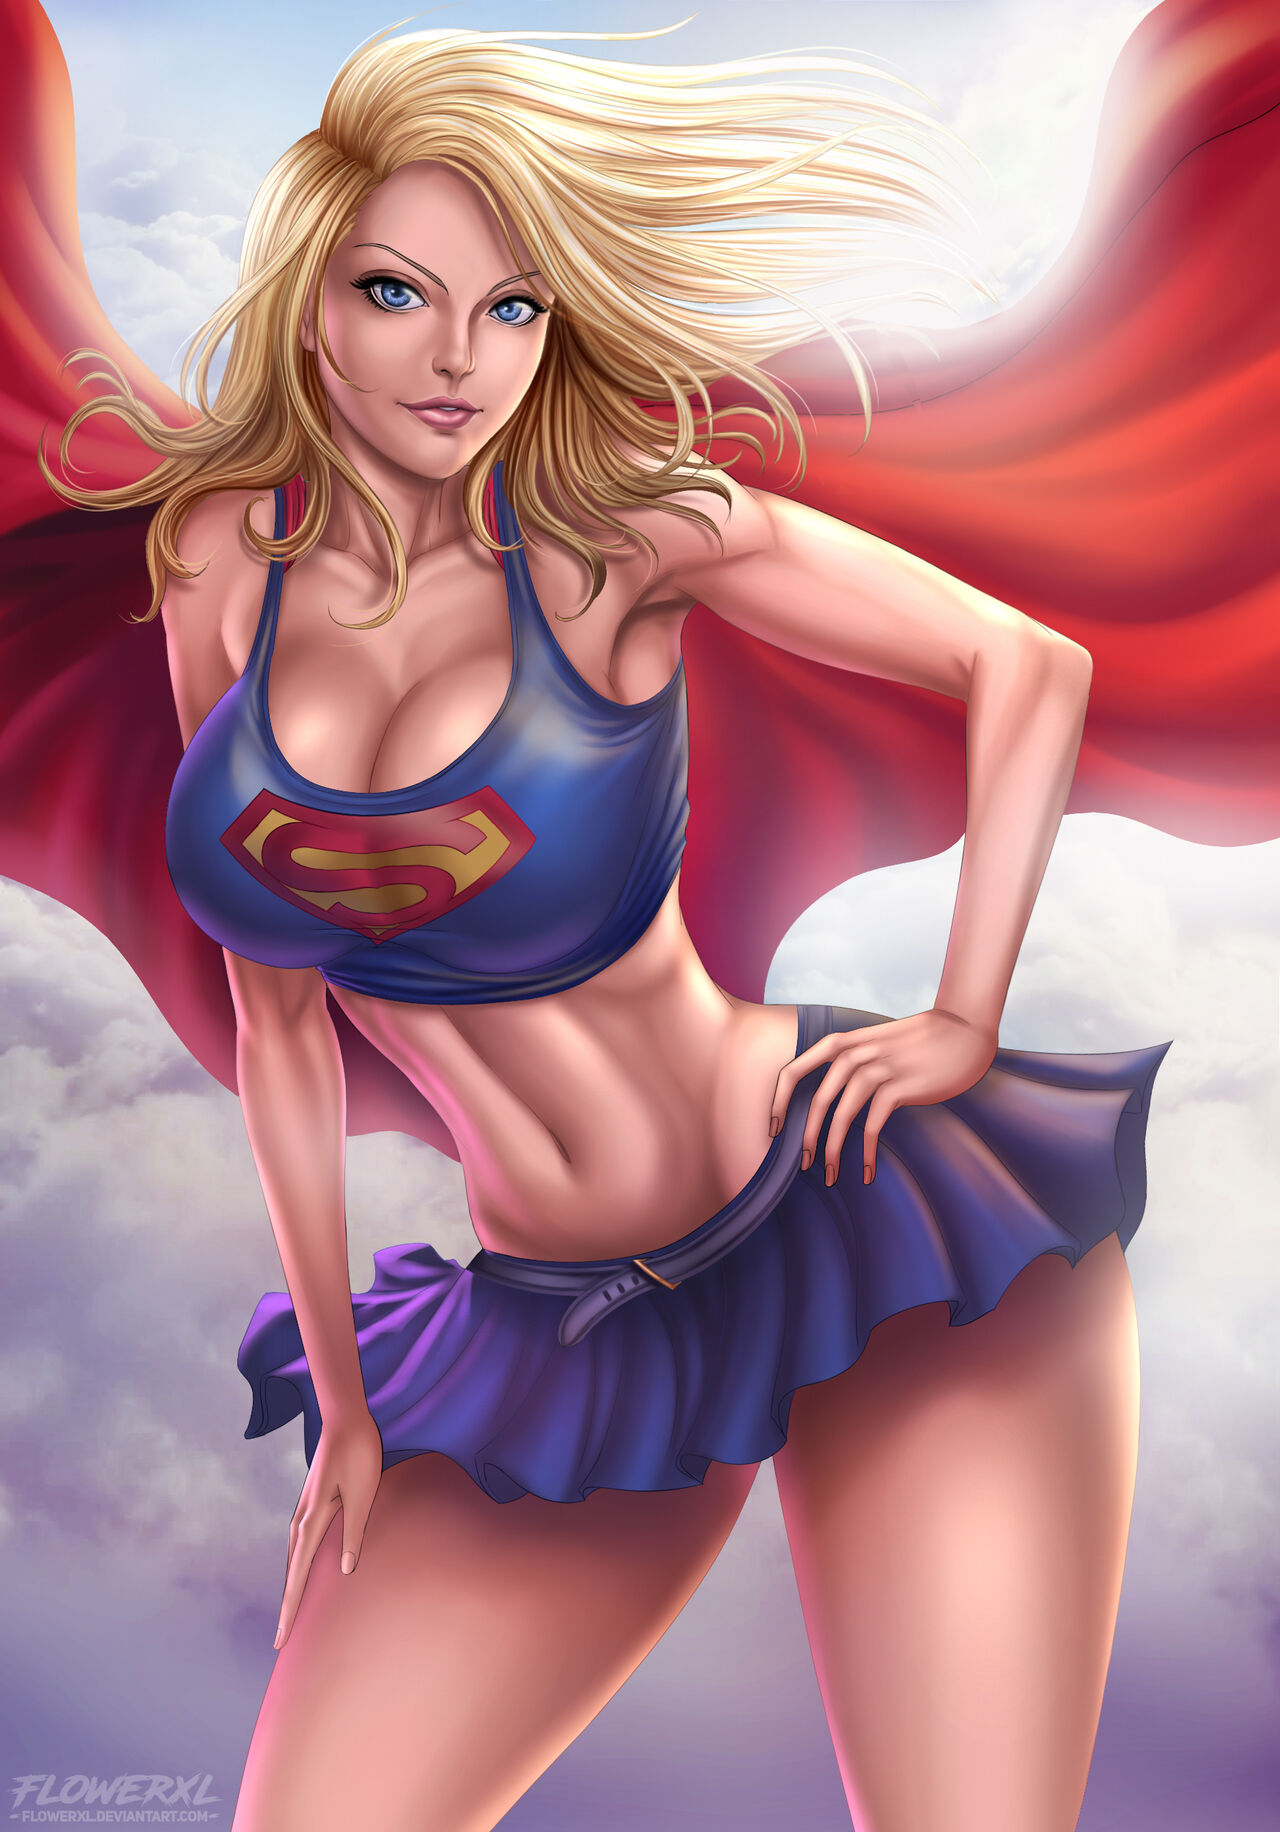 1female 1girl 1girl artist_logo athletic big_breasts big_breasts blonde_hair blue_eyes blue_skirt blue_topwear breasts cape clouds curvy dc_comics dc_comics female_only flowerxl hair_in_wind hand_on_thigh kara_zor-el long_hair looking_at_viewer pale-skinned_female pink_lips pink_lipstick pinup red_cape sky_background smile standing supergirl supergirl_(series) superheroine thick_thighs watermark